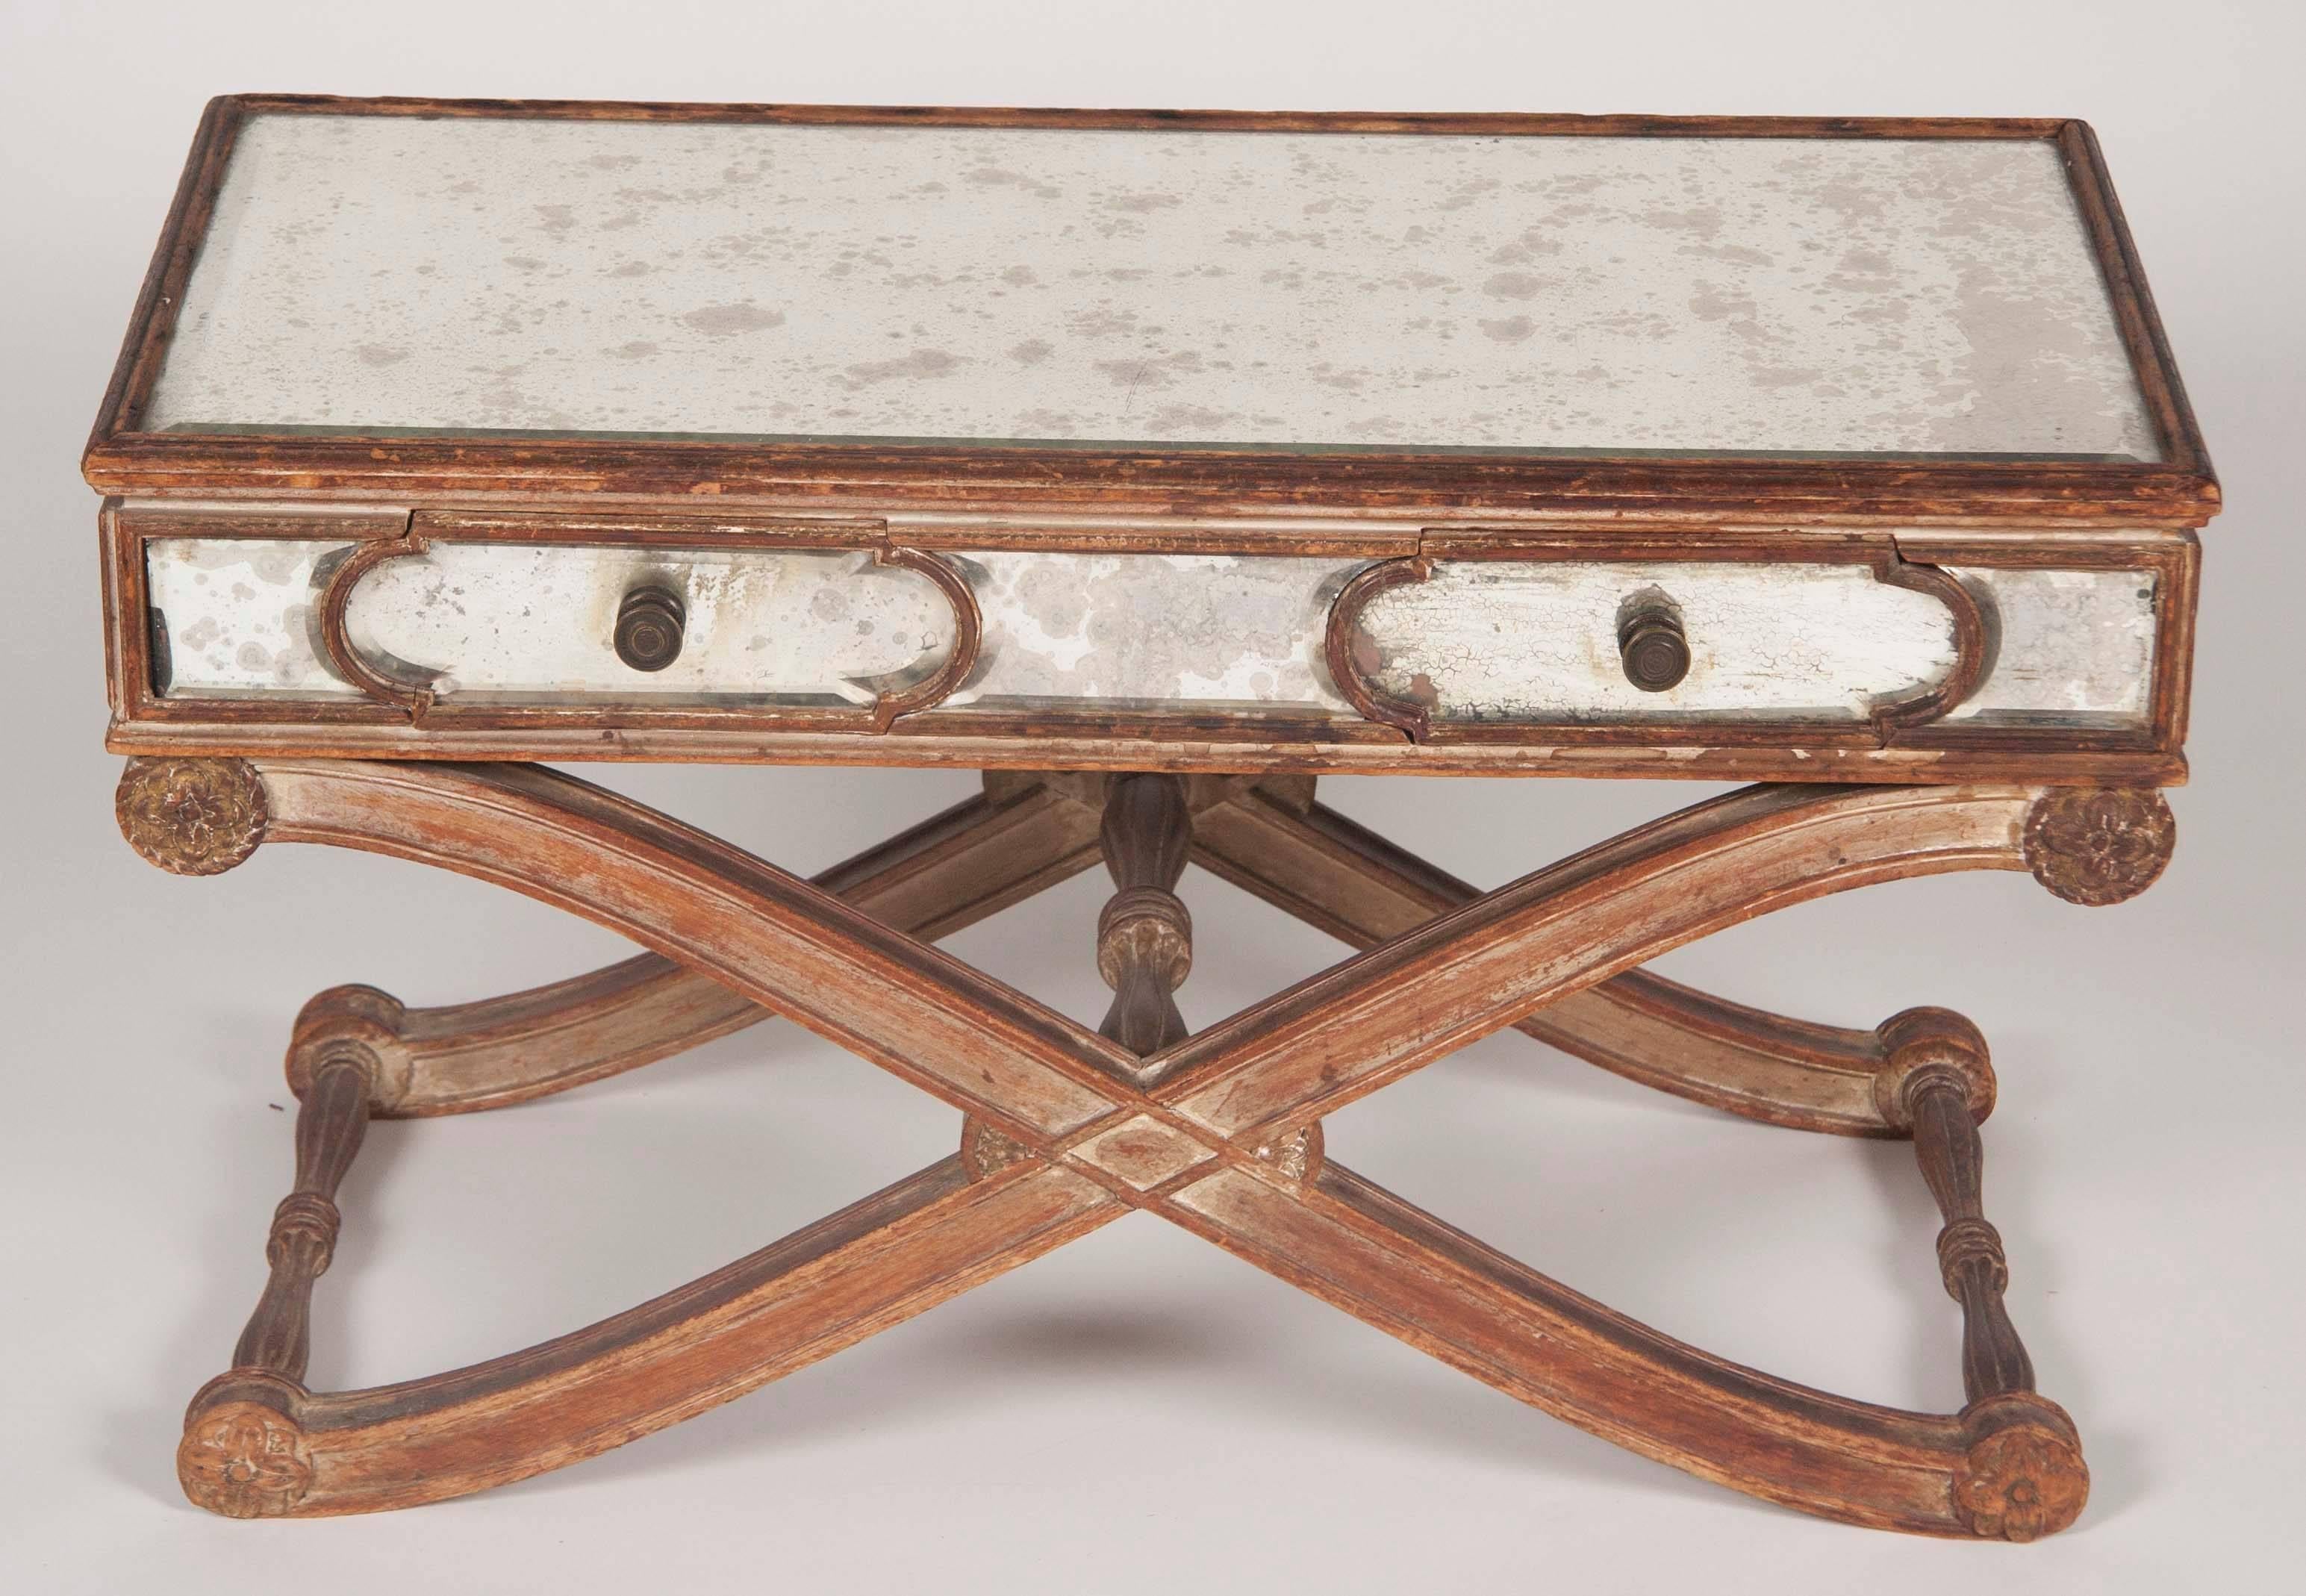 Inlay Italian Mid-20th Century Cerused Wood Mirrored Coffee Table with X-form Base For Sale